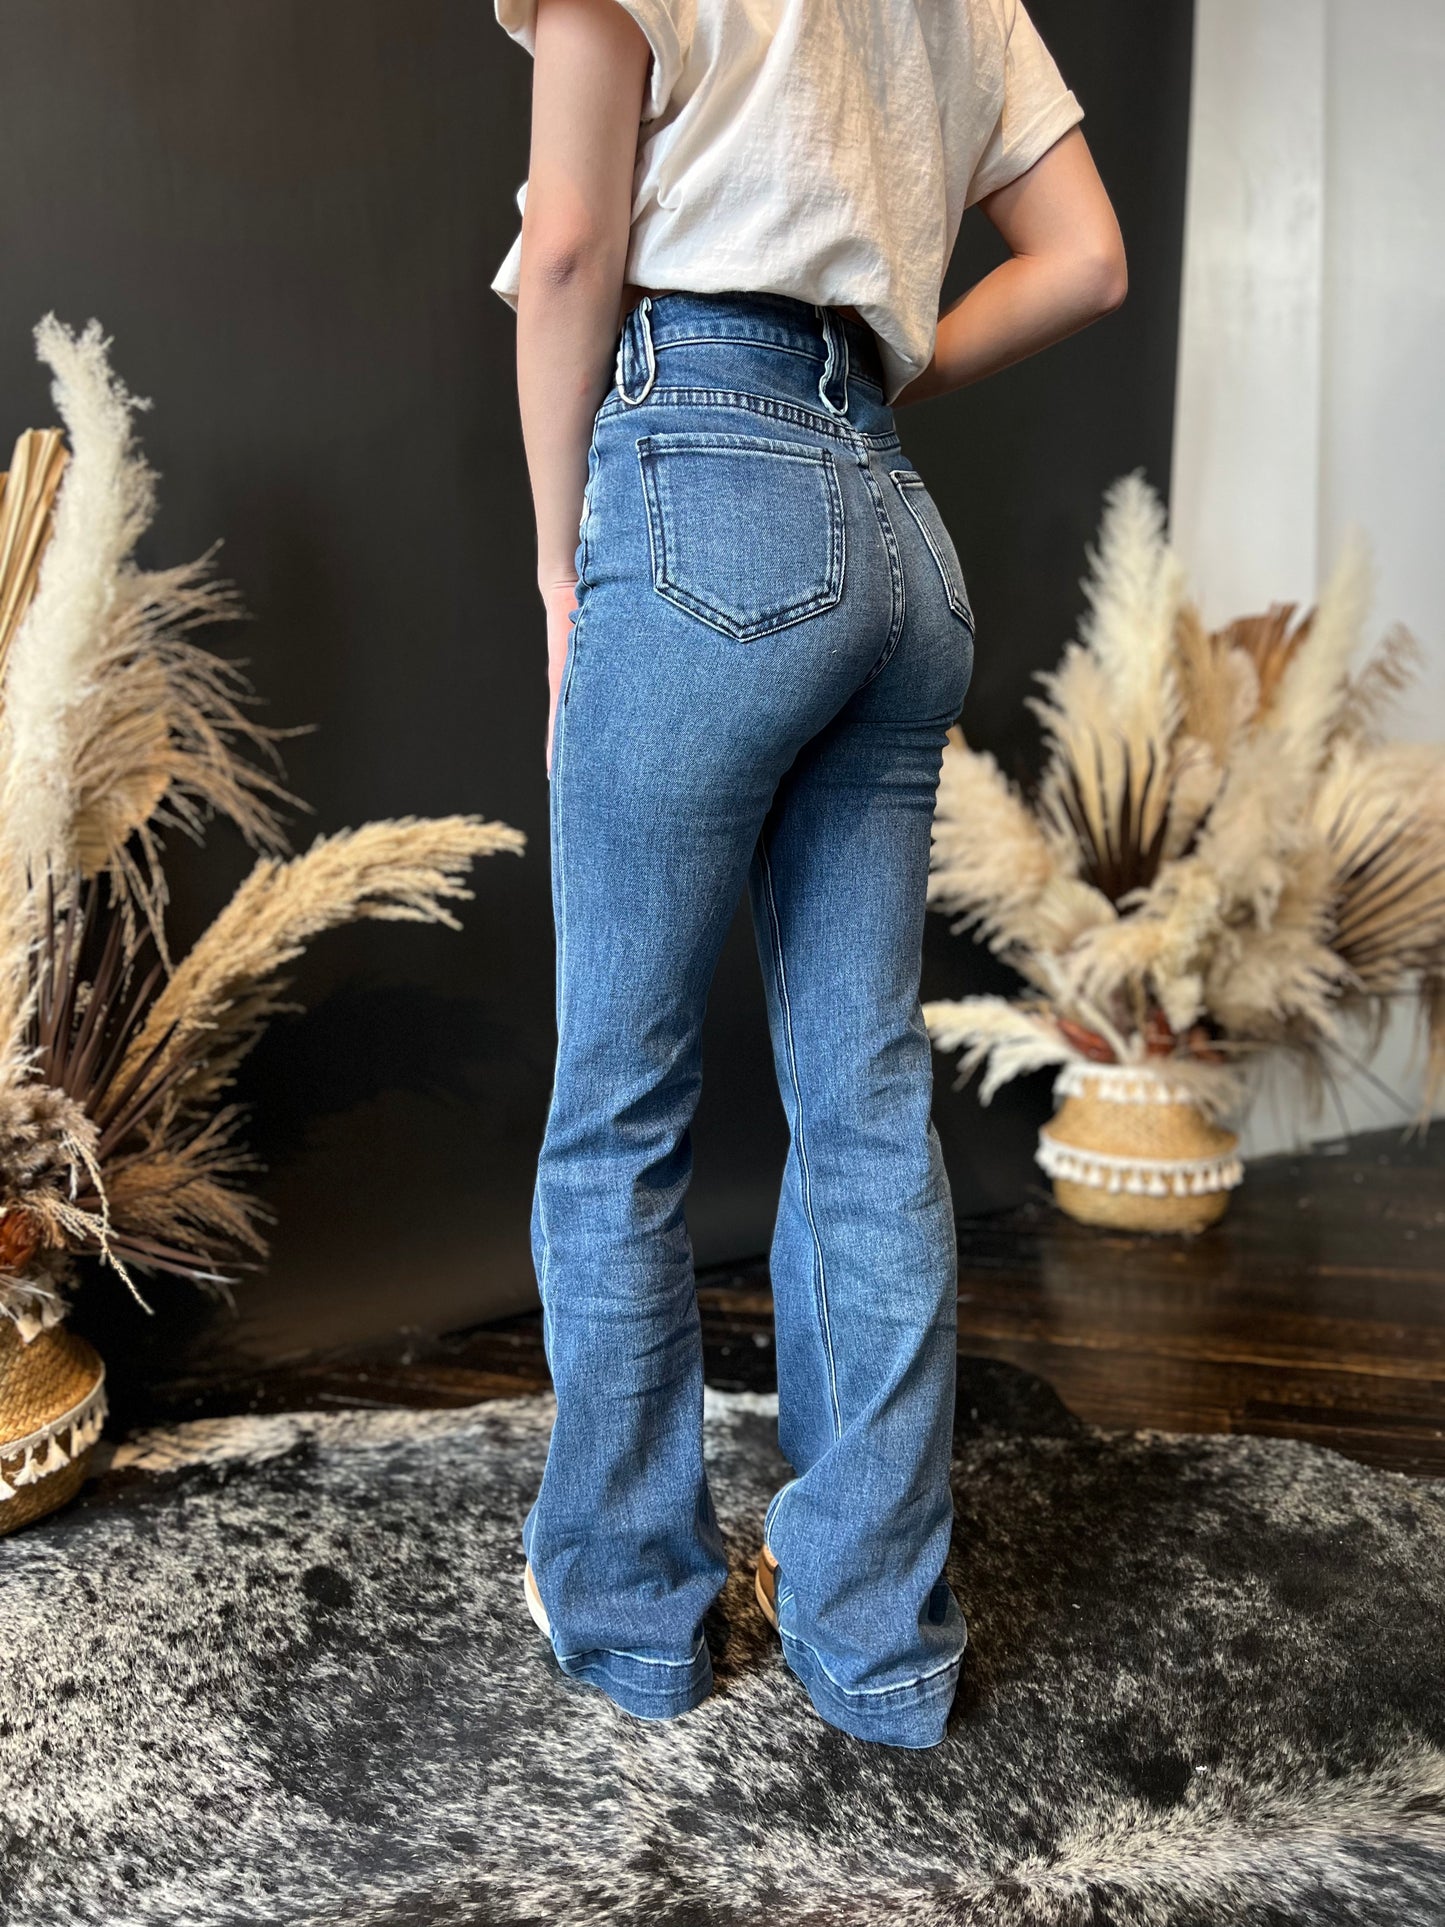 Rodeo Dreamin Trouser Jeans